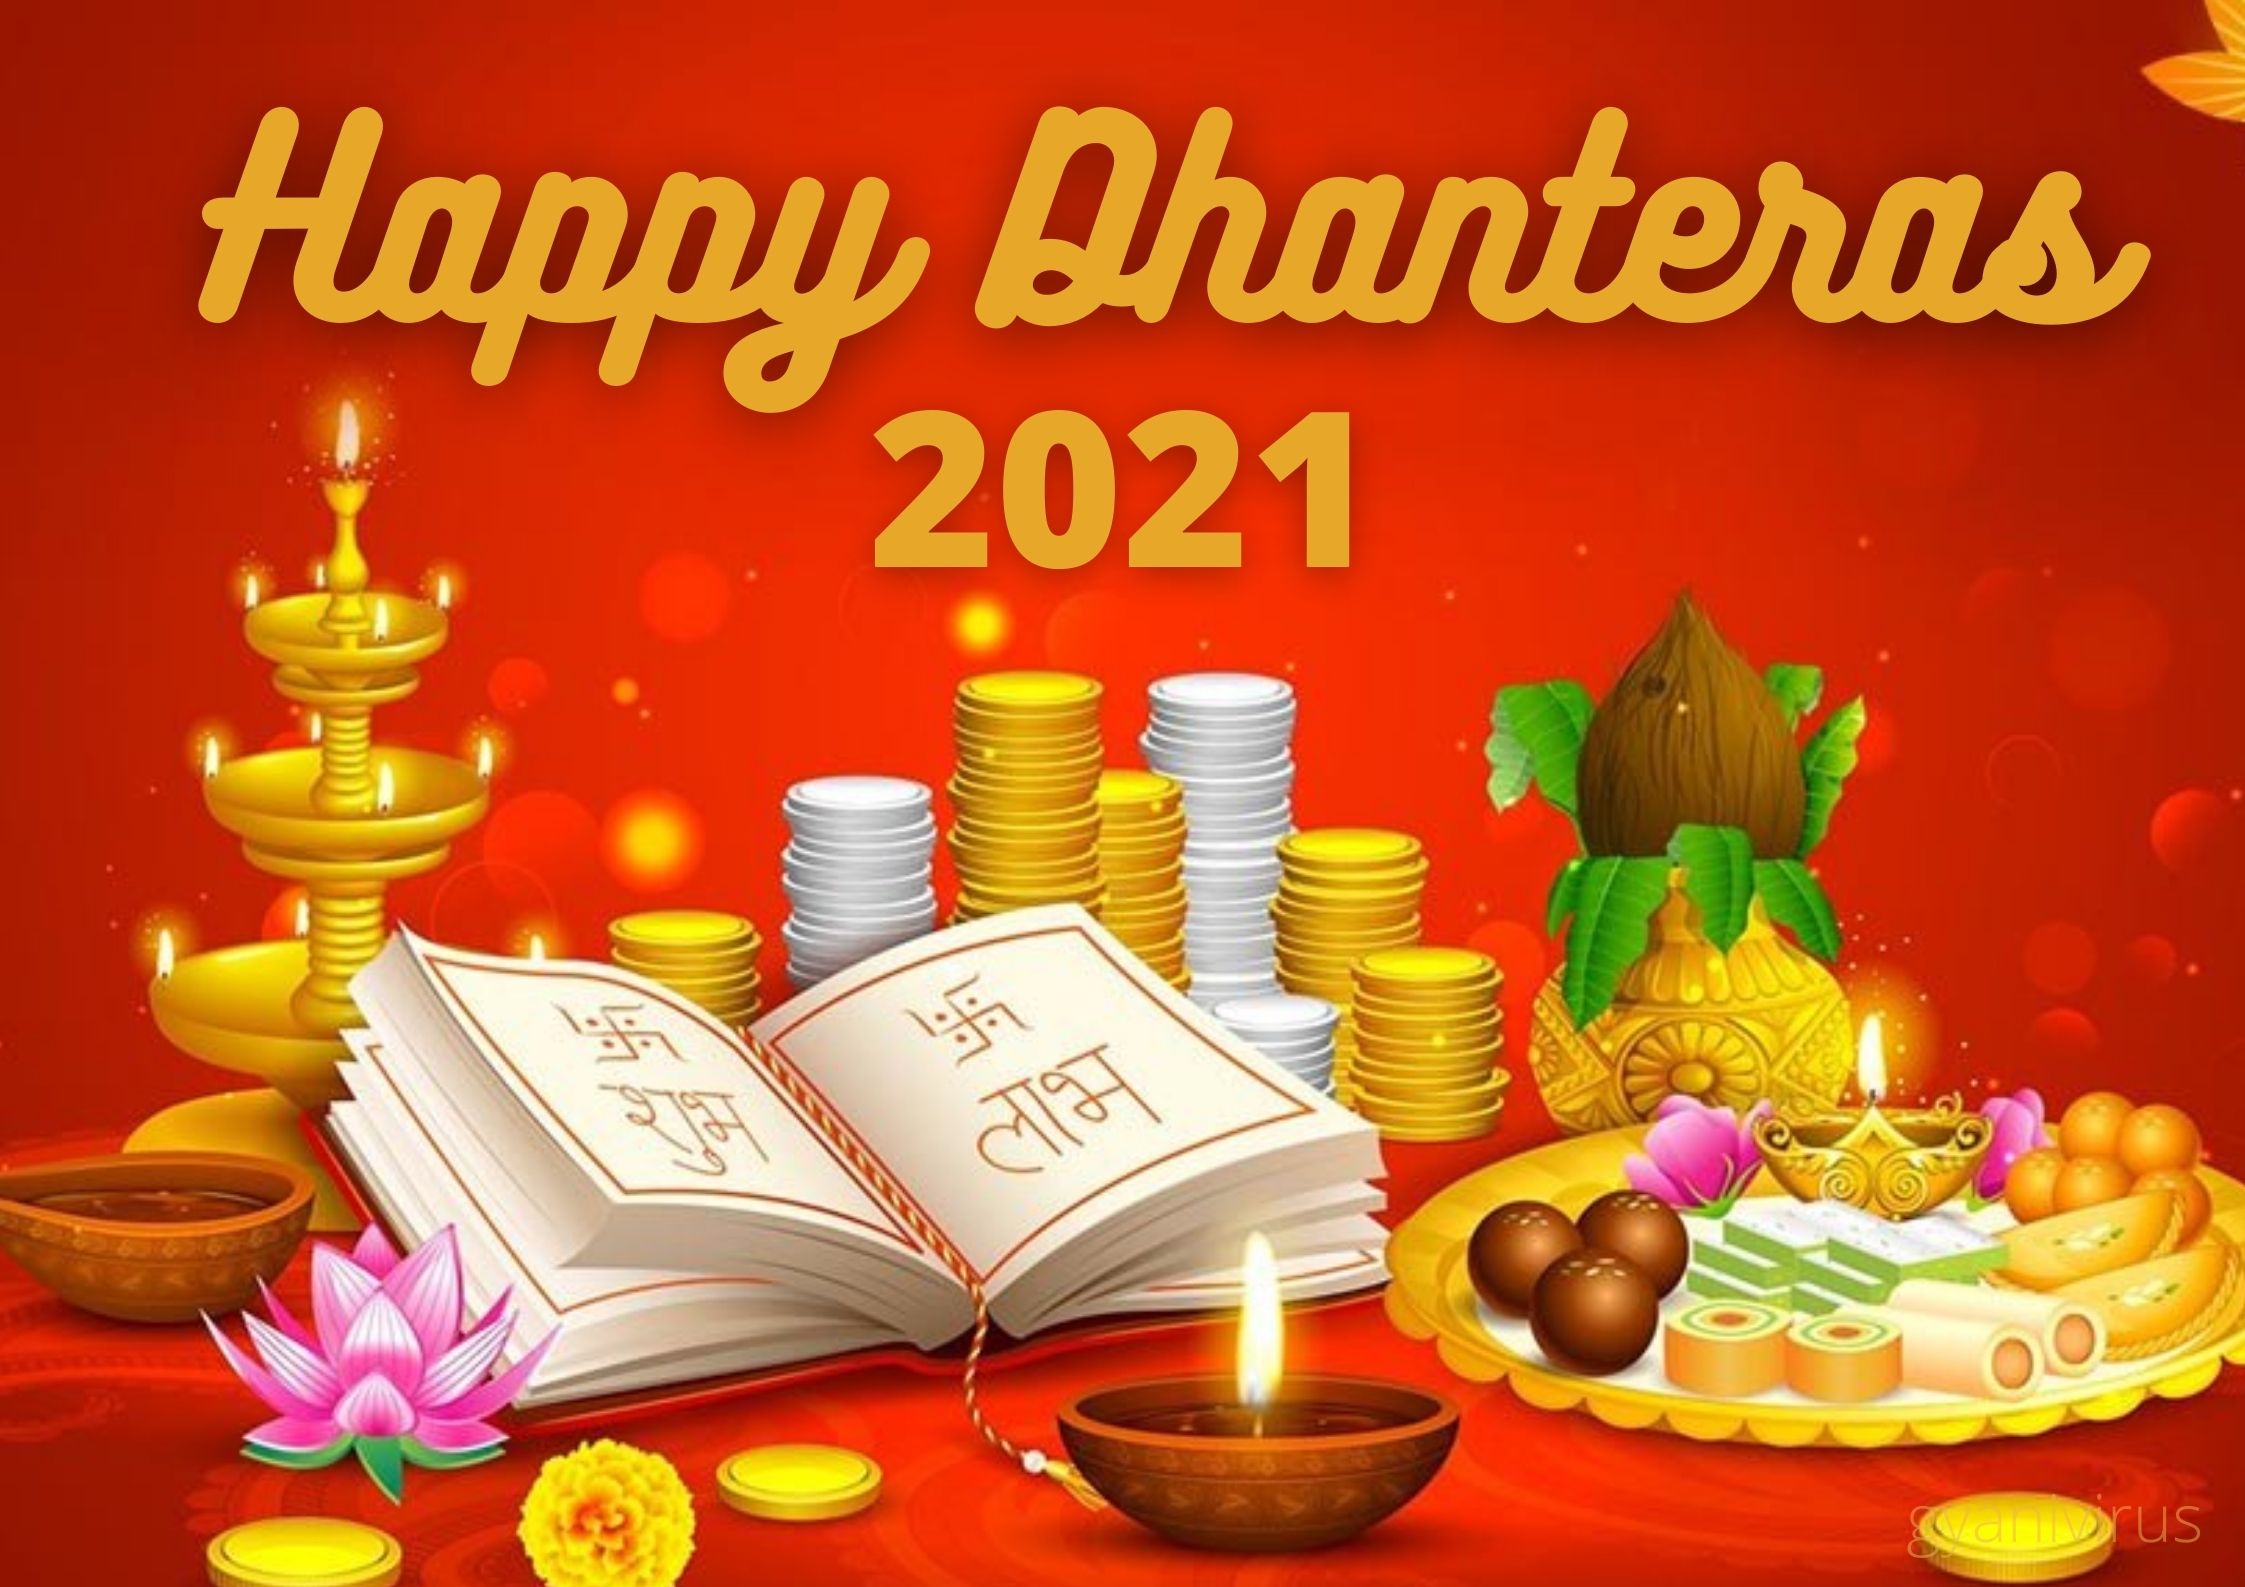 Happy-Dhanteras-kab-hai-images-wishes-puja-date-2021